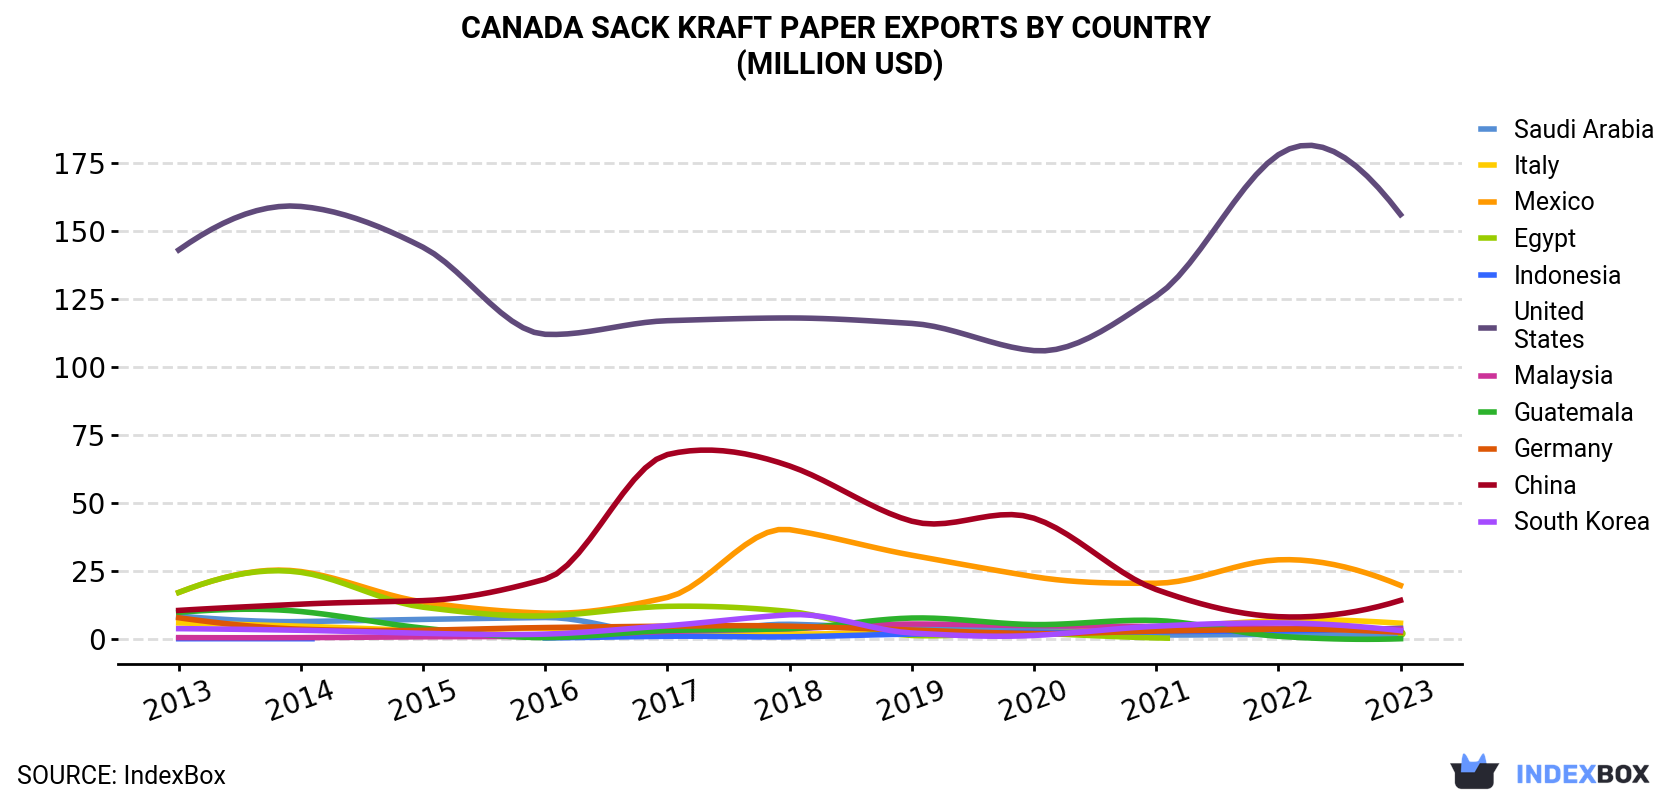 Canada Sack Kraft Paper Exports By Country (Million USD)